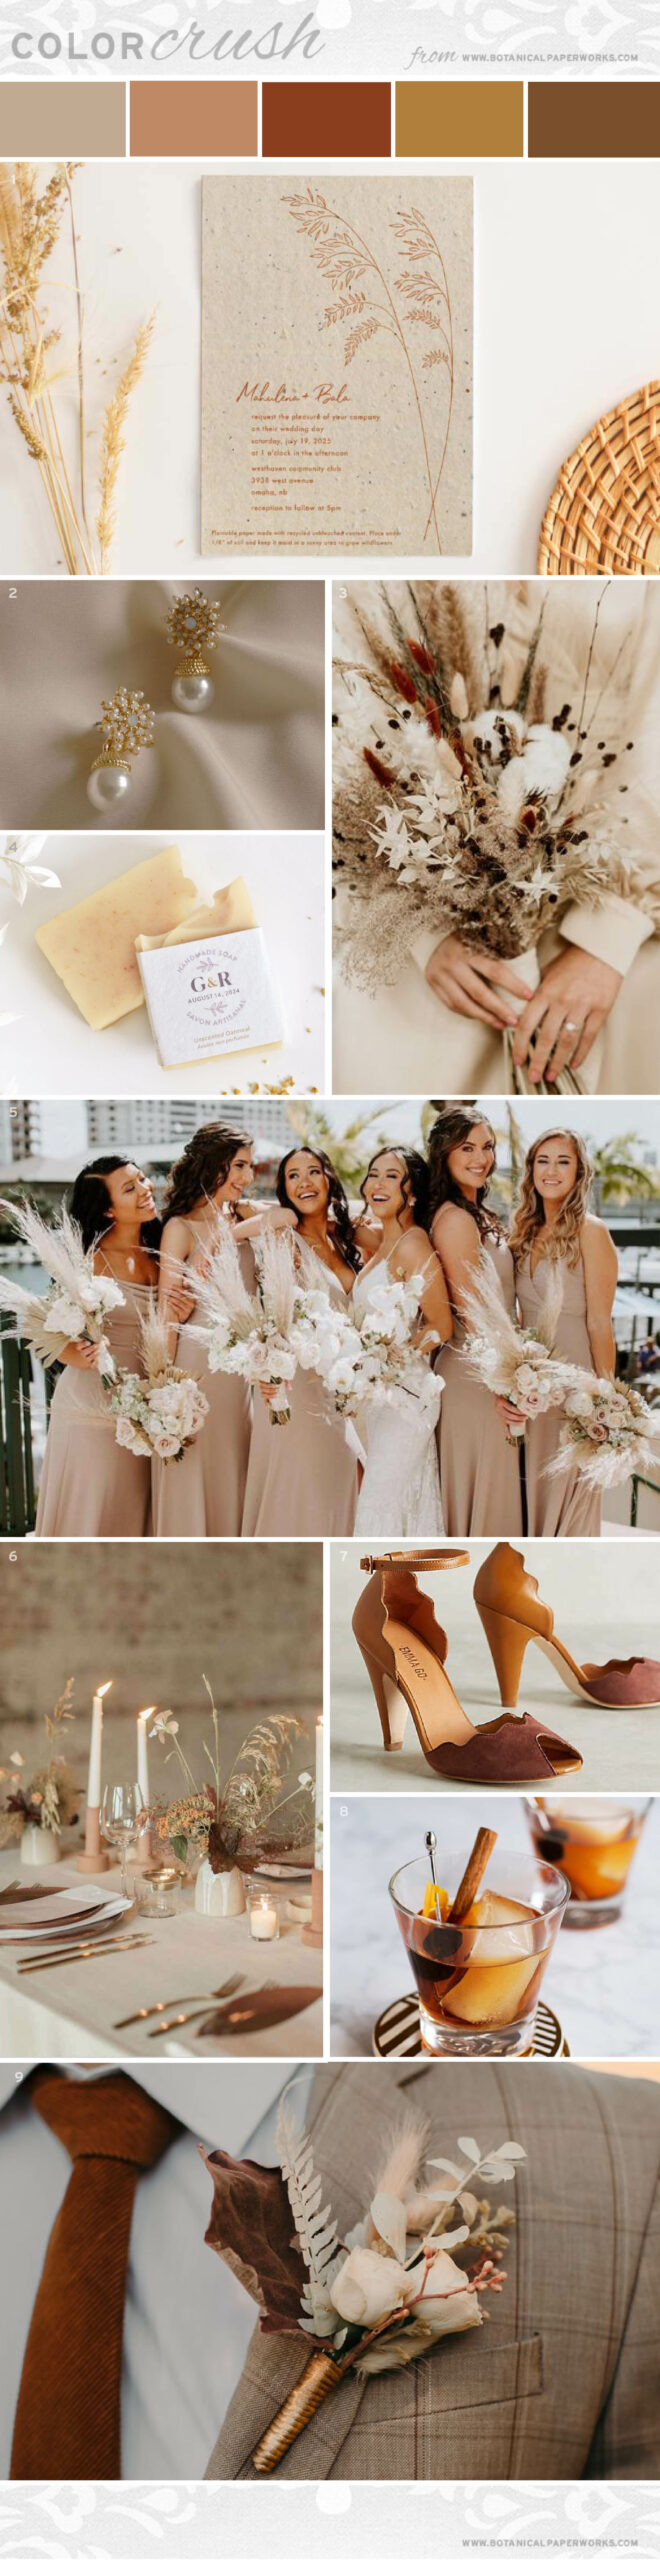  A wedding inspiration board with a color palette of copper, brown, latte, and almond. Featuring Wild Grass Seed Paper Wedding Invitations from Botanical PaperWorks.